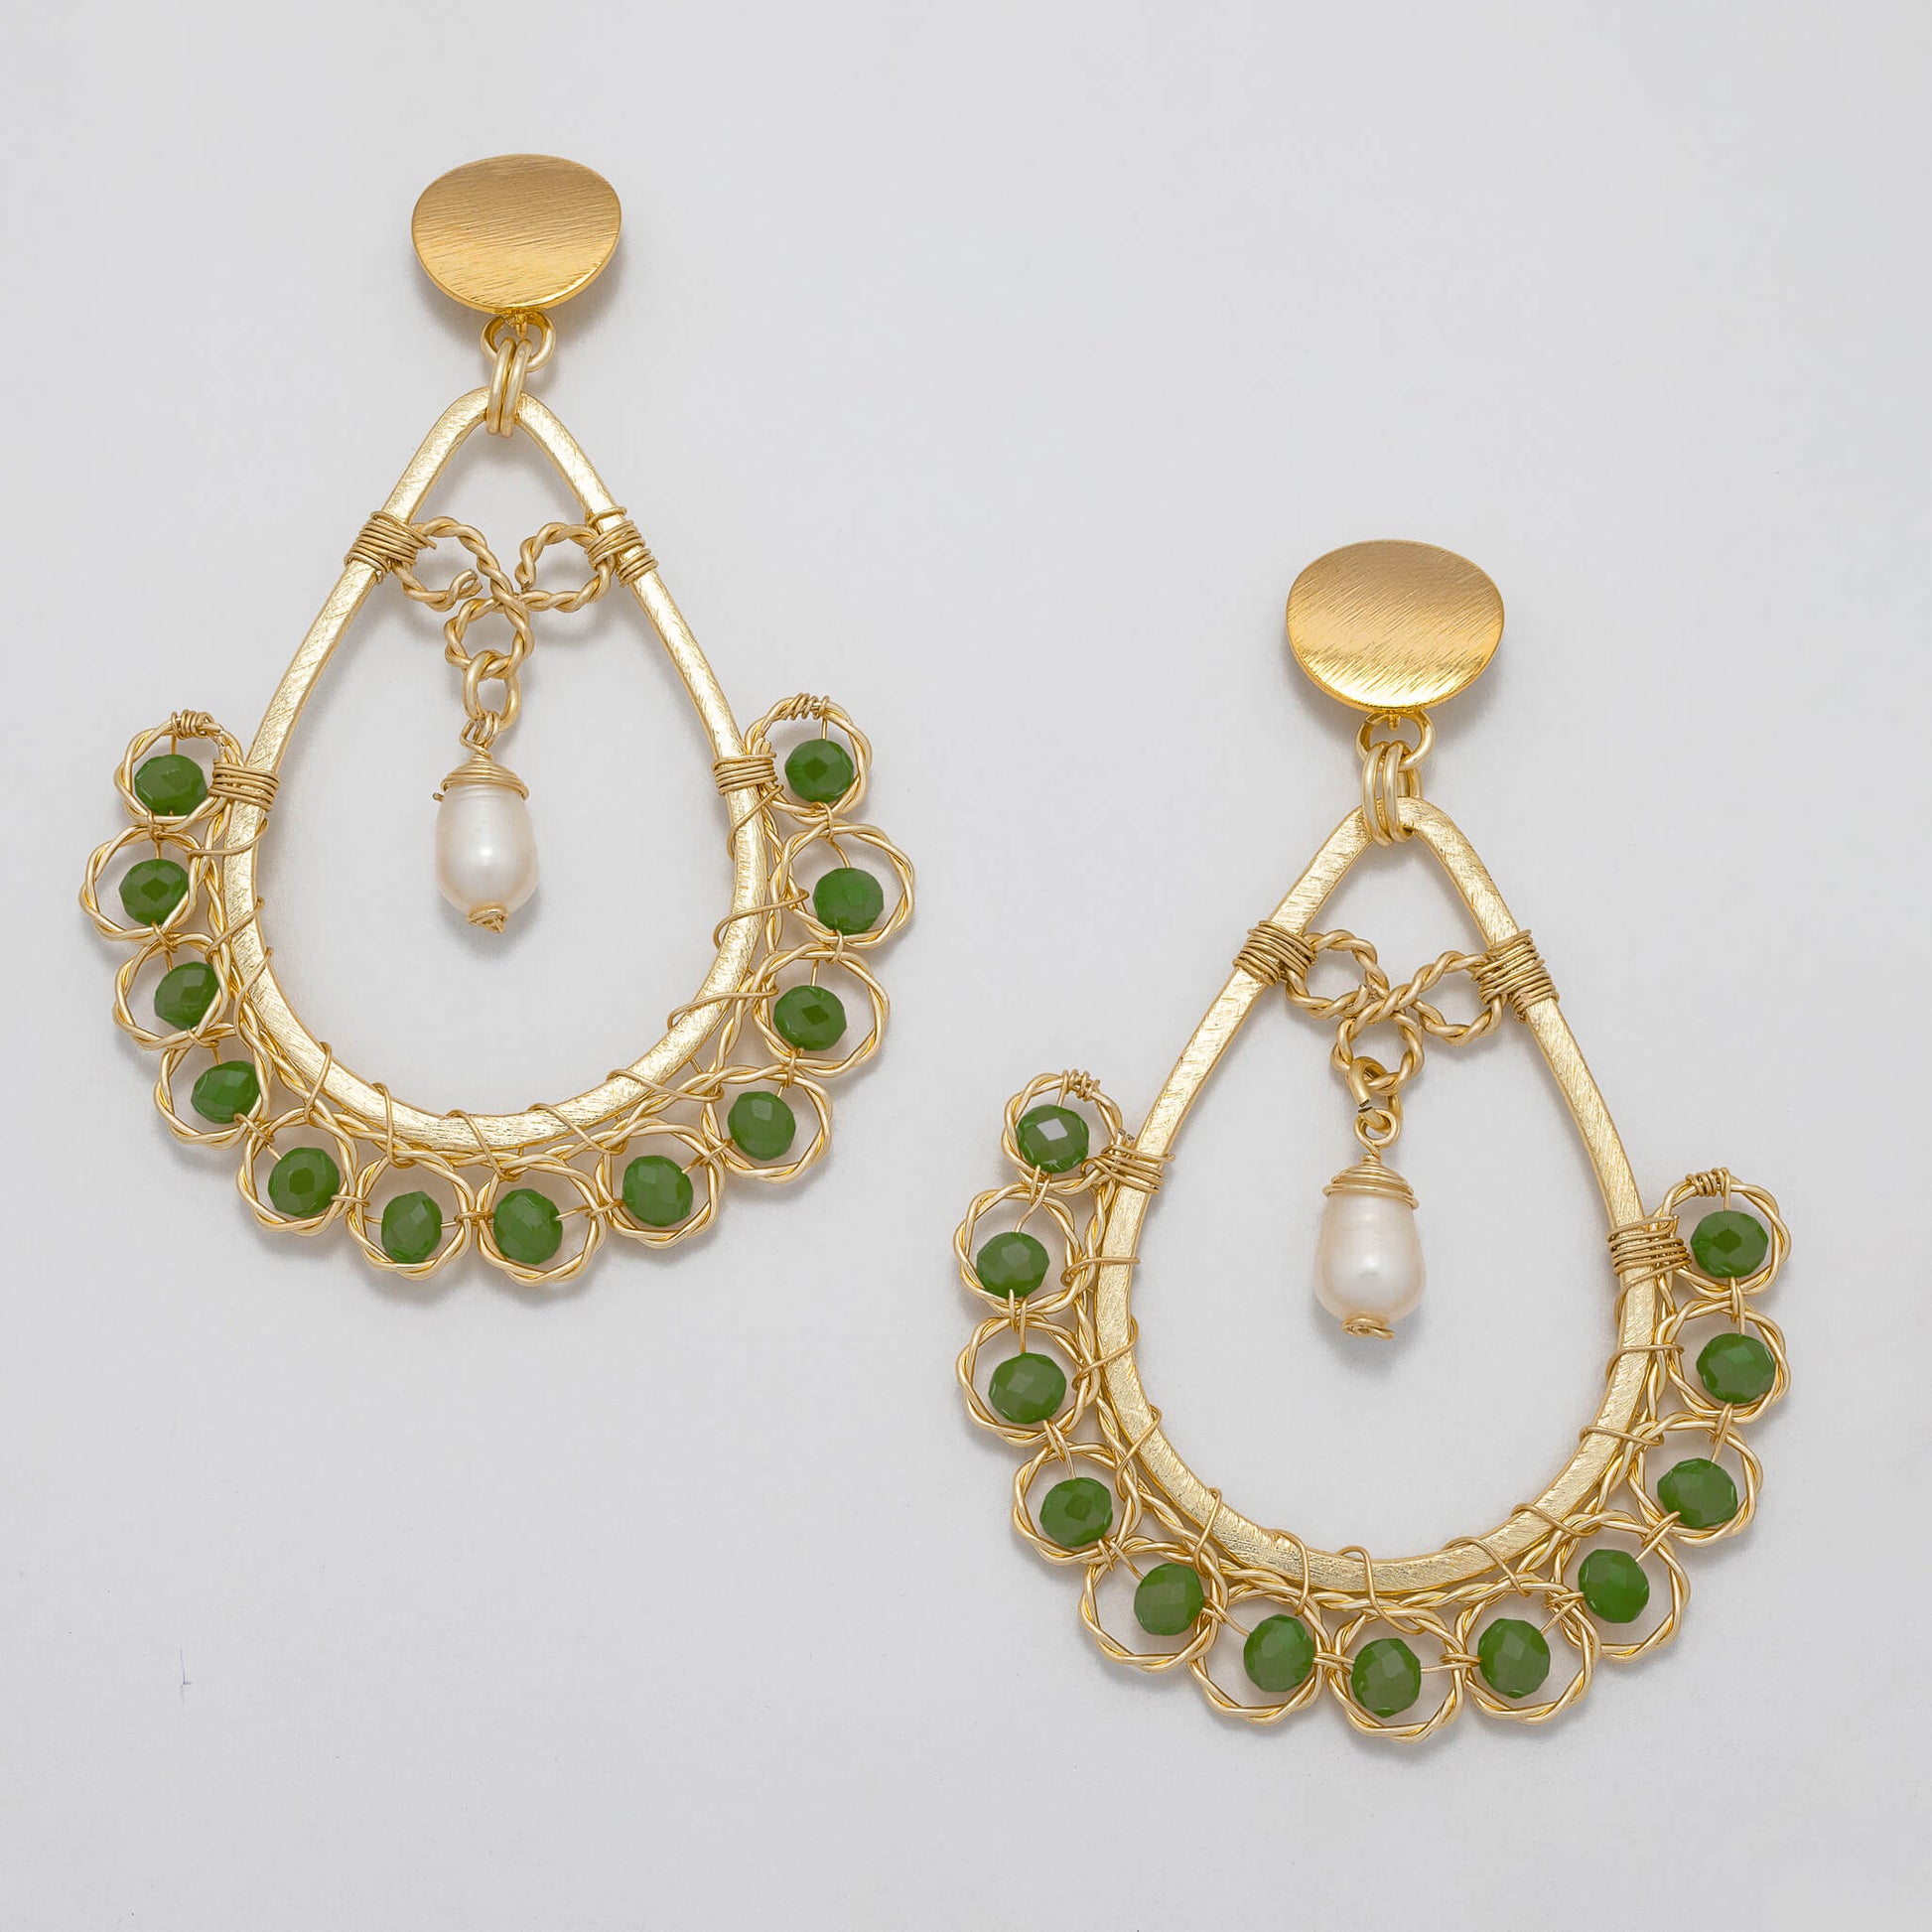 Amara I Earrings are 3 inches long. Gold teardrop Earrings. Gold, Light green and White earrings. Handmade with Faceted Crystal beads and freshwater pearls. Wire Wrapped Earrings.